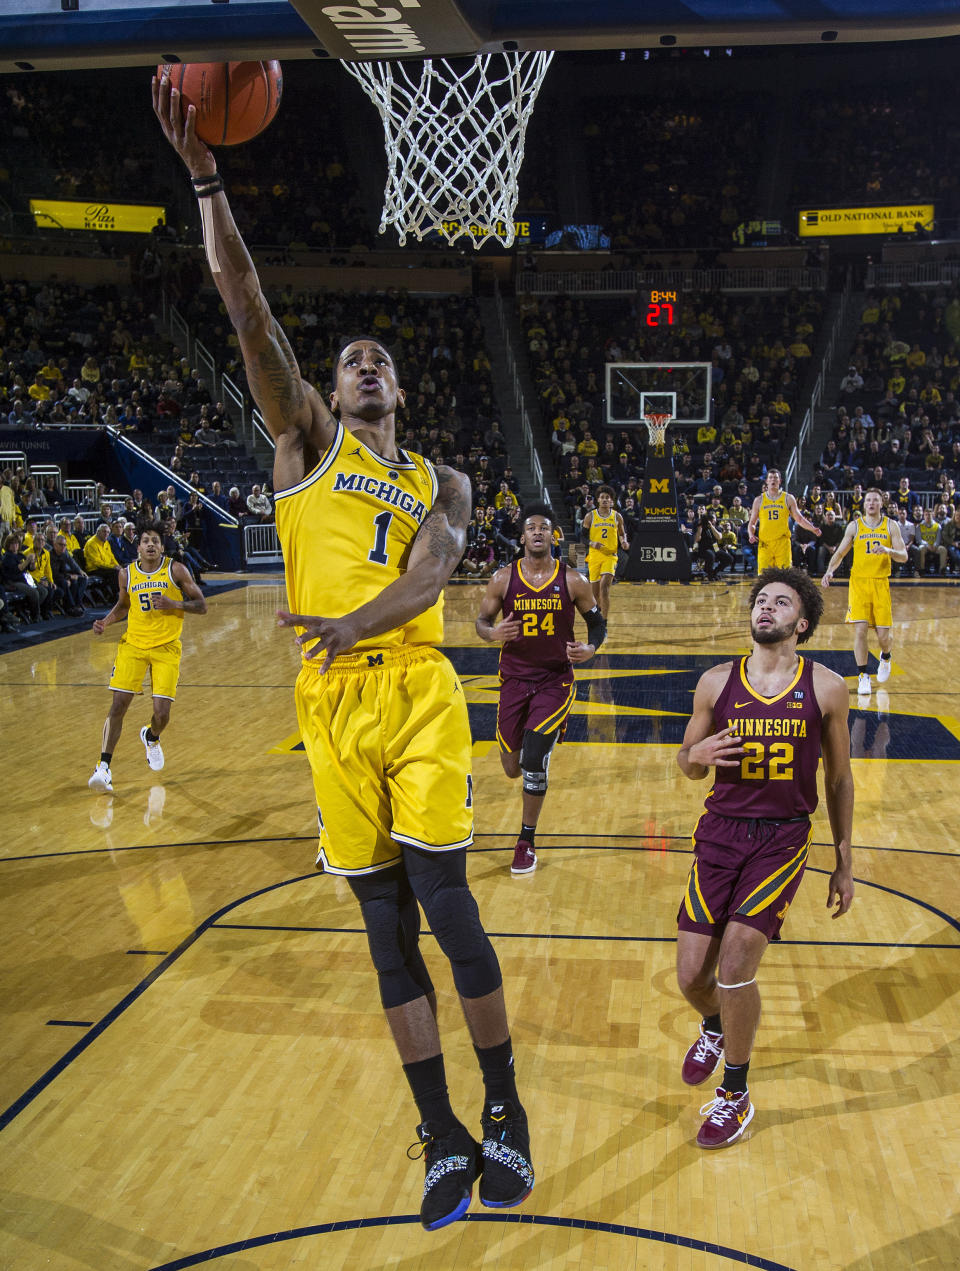 Michigan guard Charles Matthews (1) breaks away for a basket, followed by Minnesota guard Gabe Kalscheur (22), in the first half of an NCAA college basketball game at Crisler Center in Ann Arbor, Mich., Tuesday, Jan. 22, 2019. (AP Photo/Tony Ding)